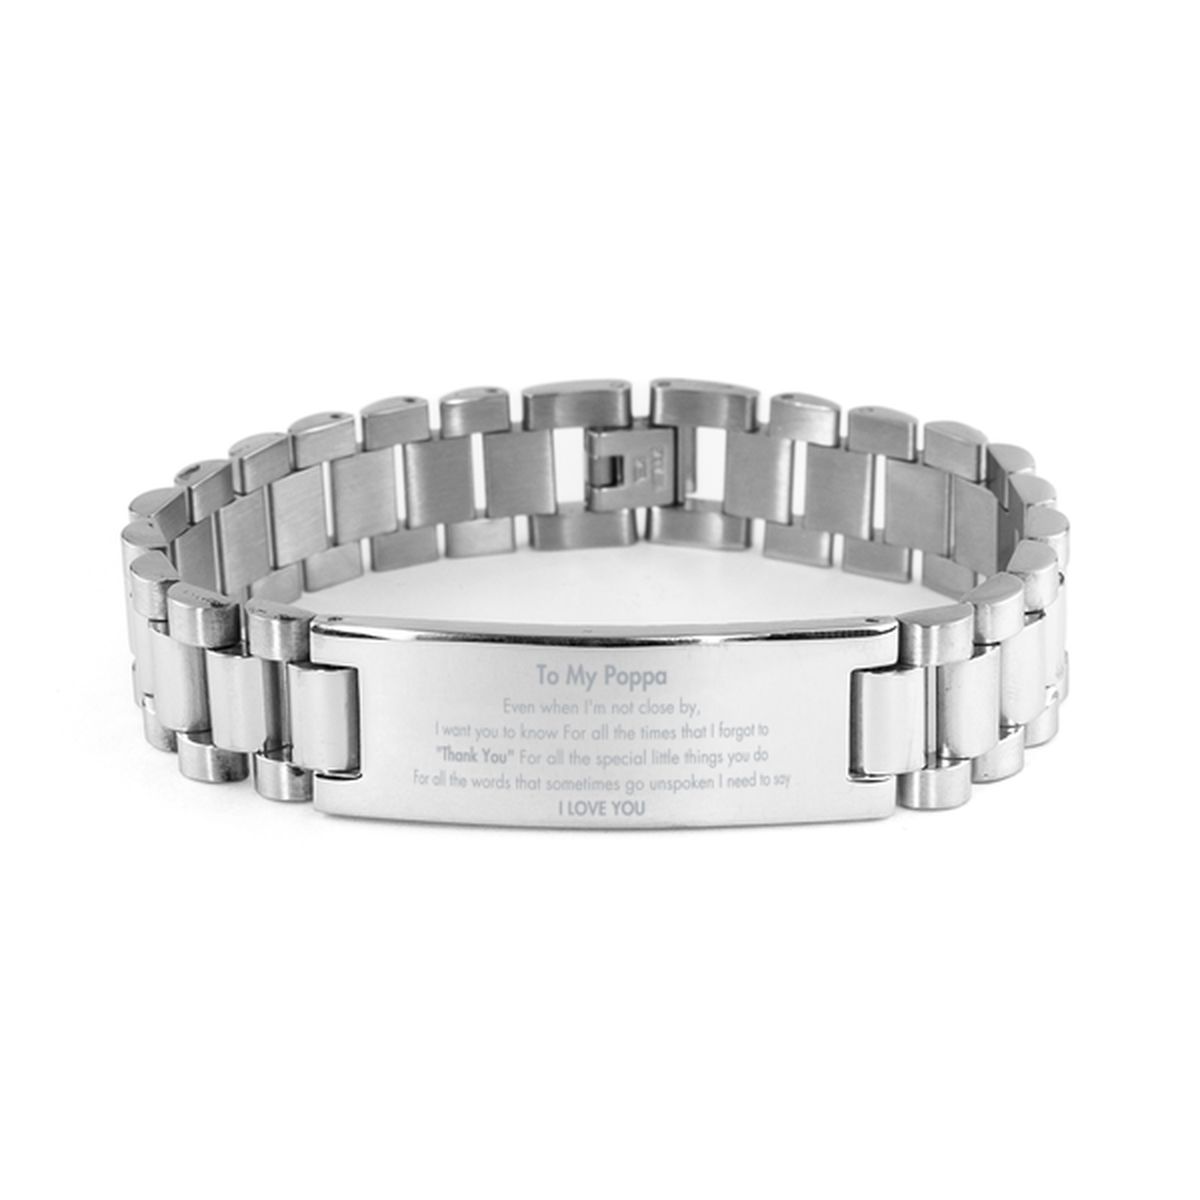 Thank You Gifts for Poppa, Keepsake Ladder Stainless Steel Bracelet Gifts for Poppa Birthday Mother's day Father's Day Poppa For all the words That sometimes go unspoken I need to say I LOVE YOU